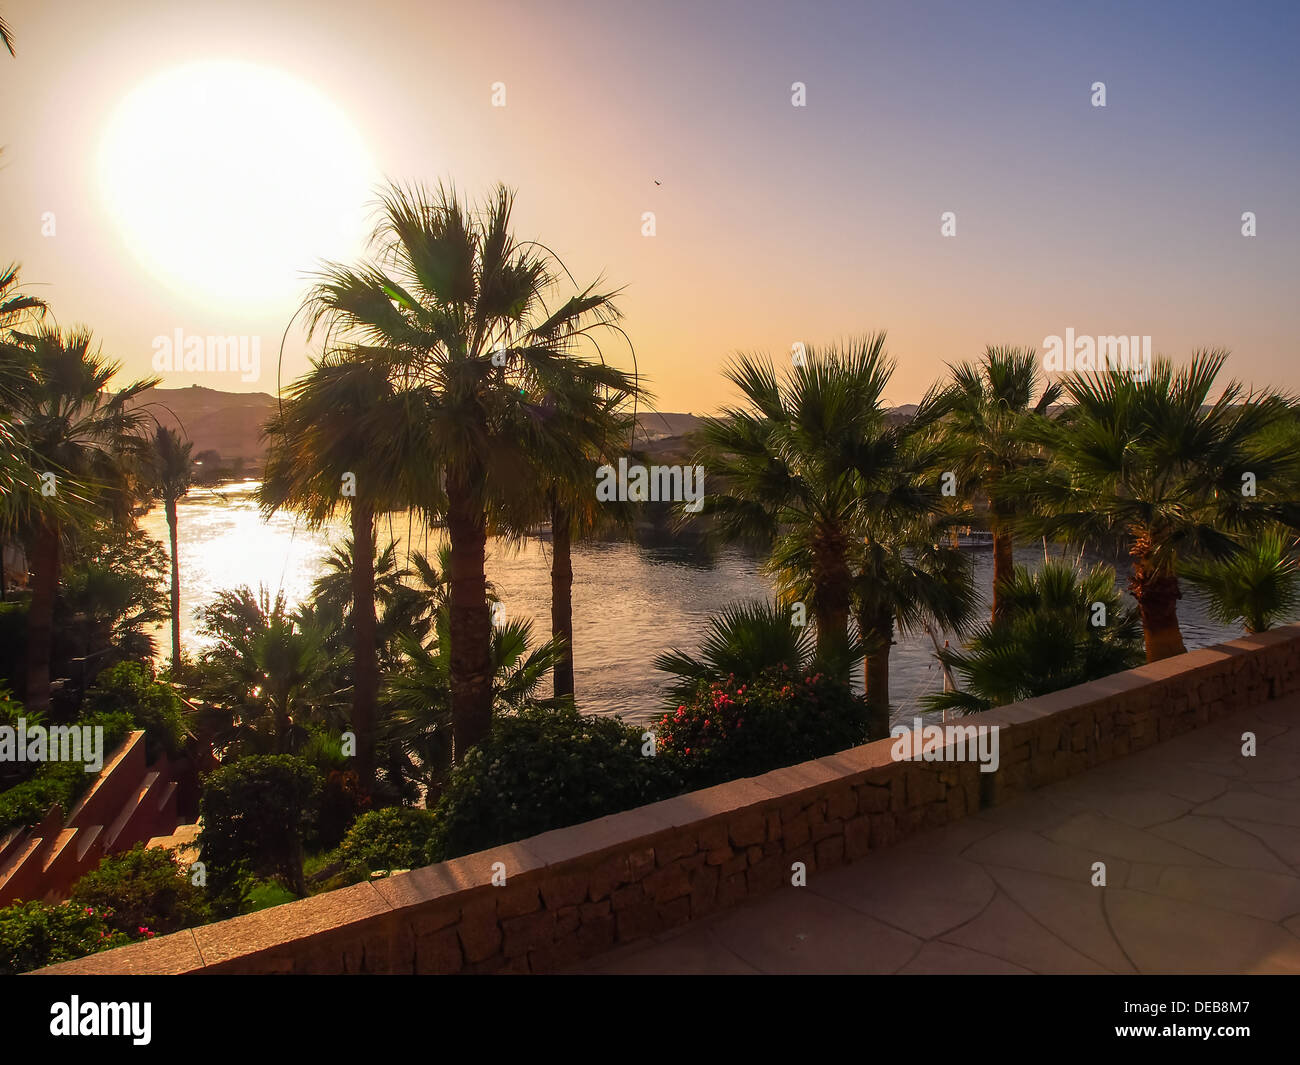 The view from the veranda of the Old Cataract hotel in Aswan, Egypt Stock Photo